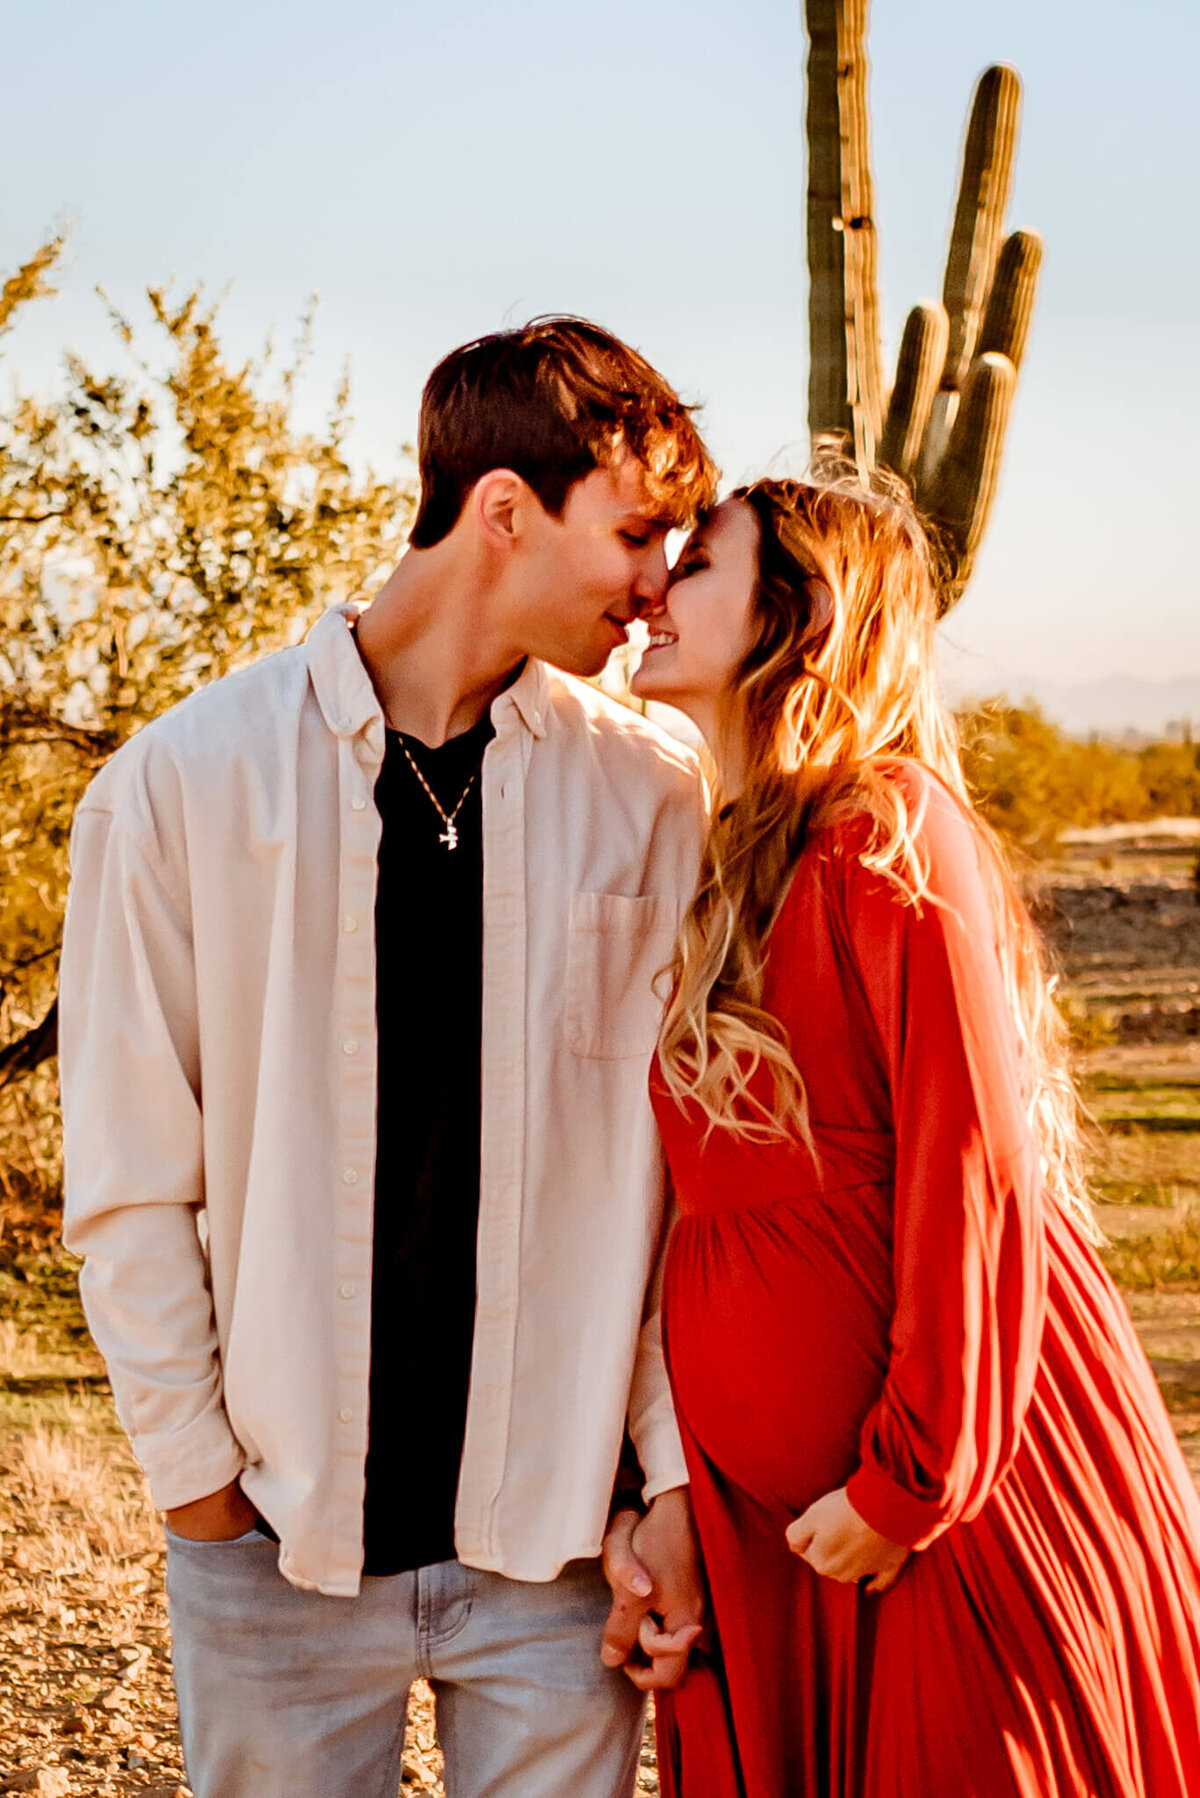 rust maternity dress on mom who is kissing dad for maternity photos in AZ